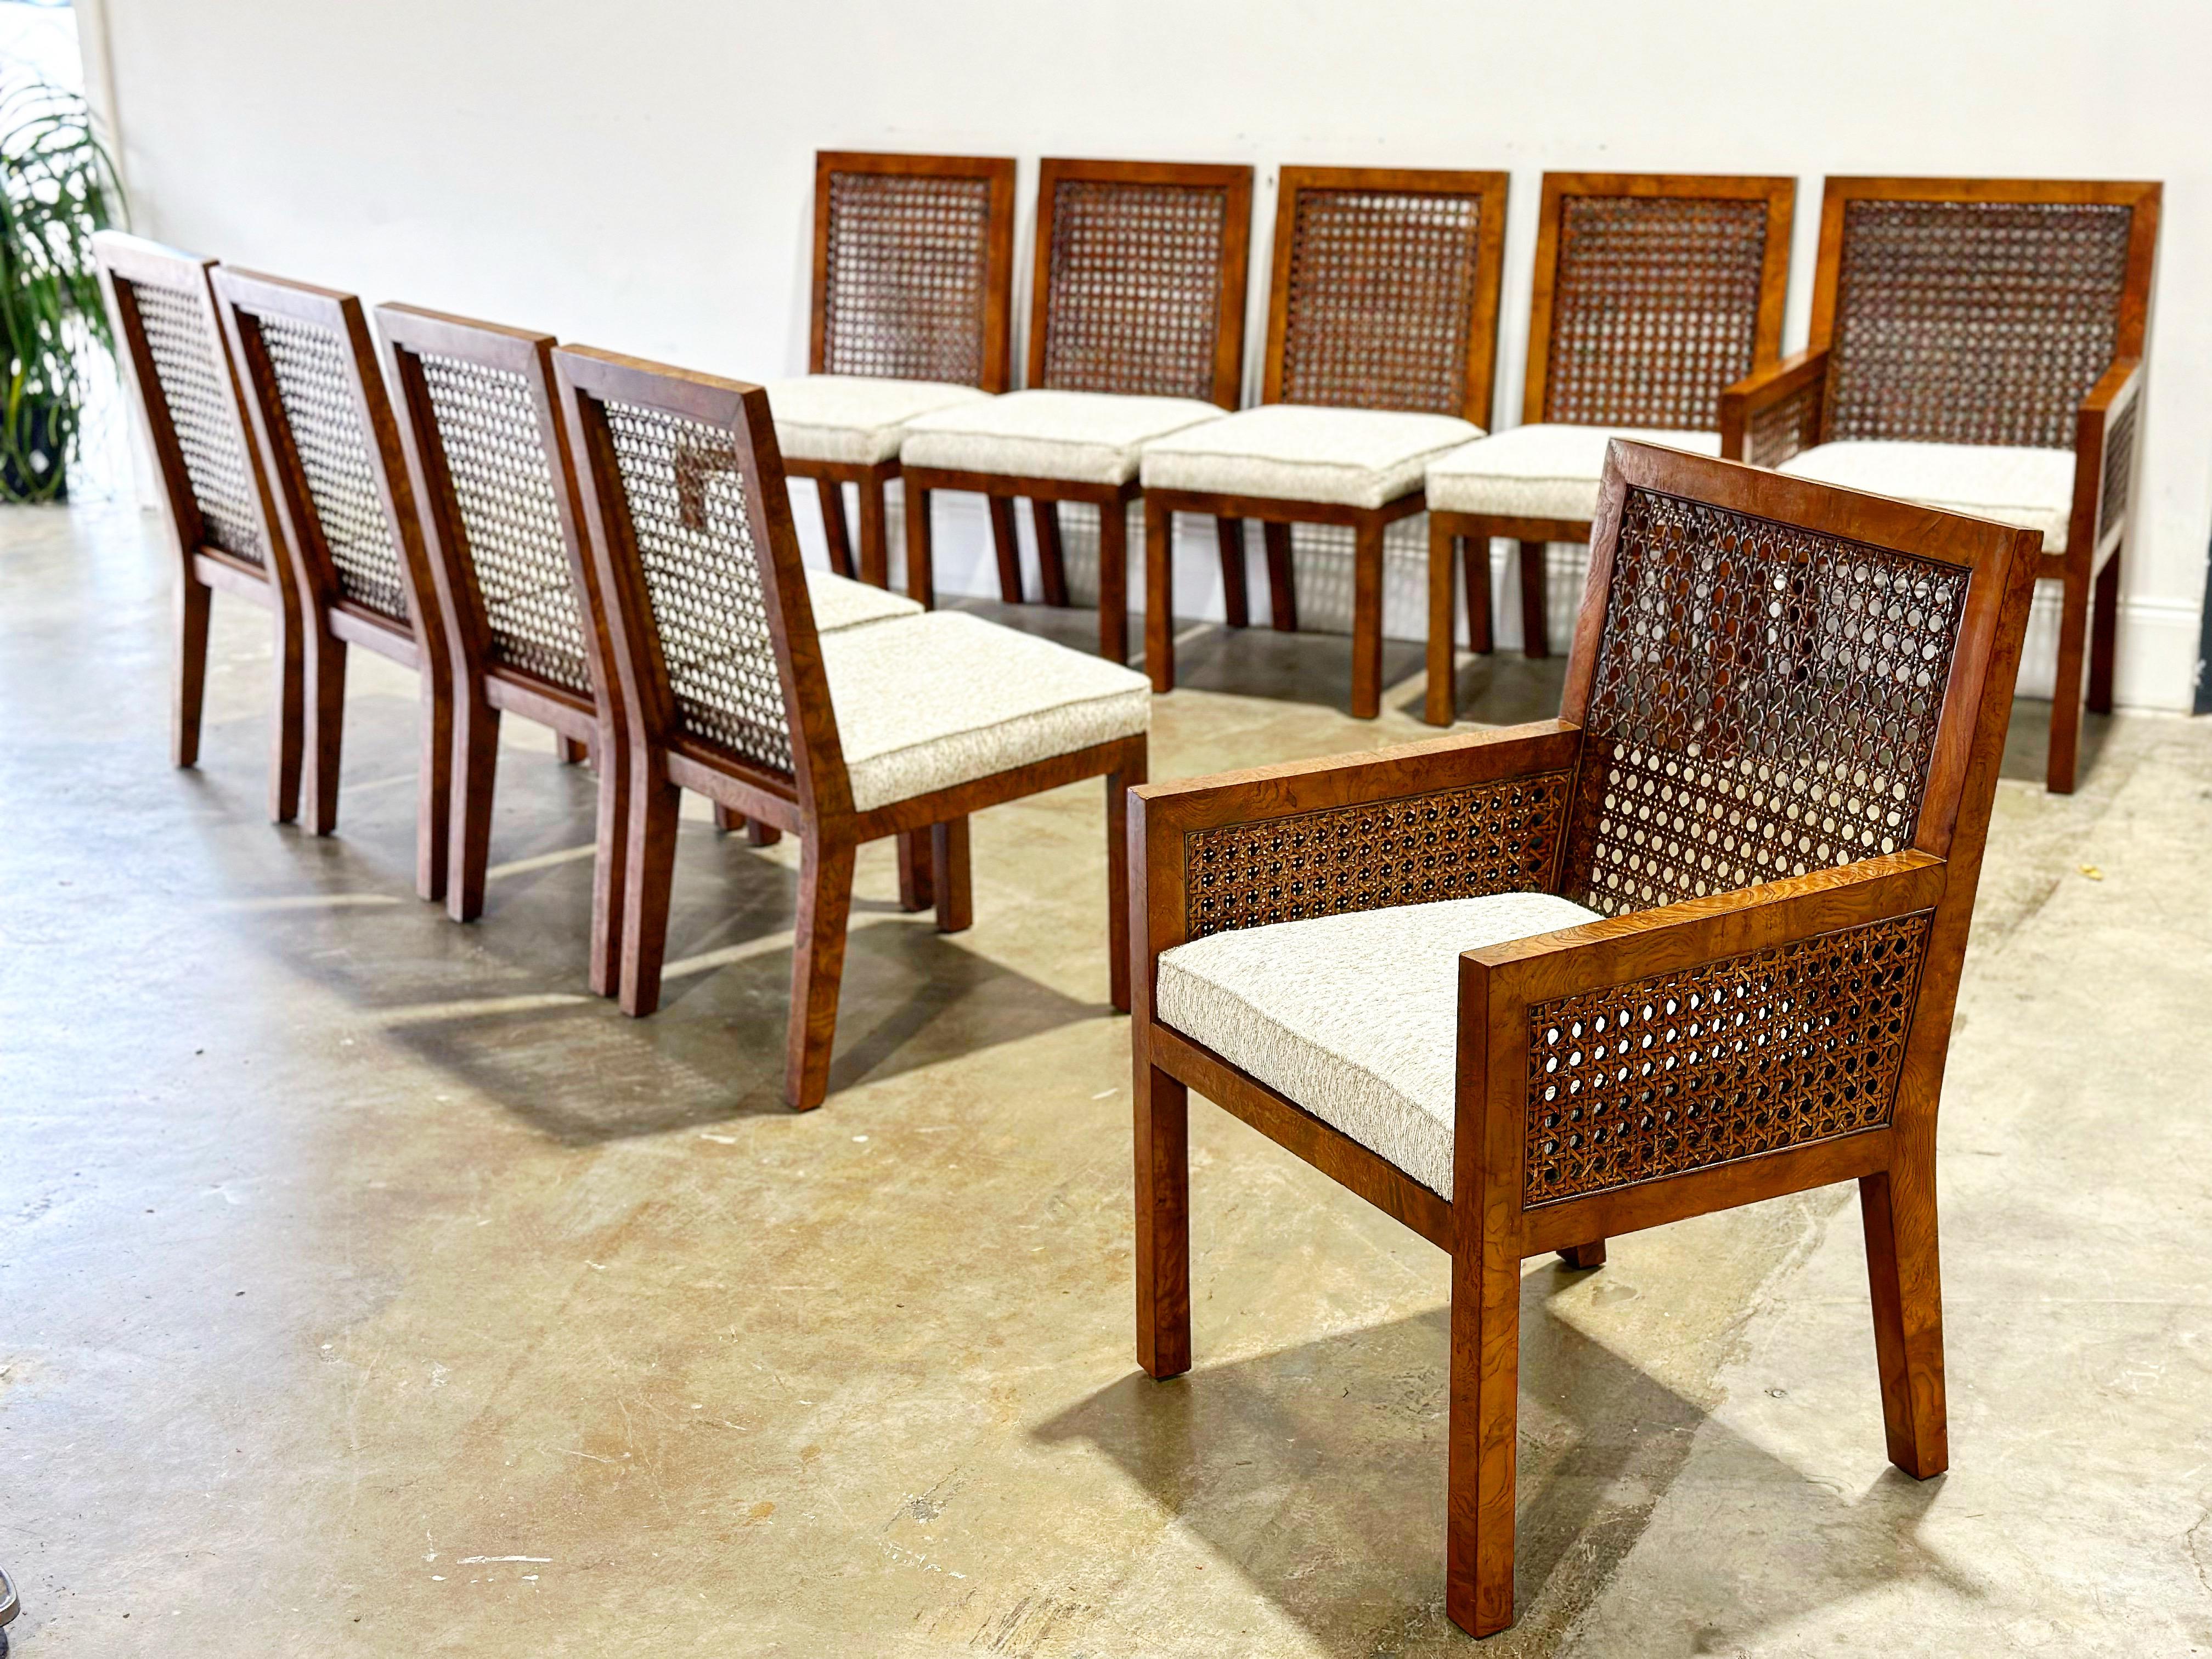 Exquisite set of TEN (10) burled ash and cane Parsons style dining chairs by John Widdicomb, circa 1950s. This set is unique on the market. It includes eight (8) side chairs and two (2) arm or captains chairs
Thoughtful and precise design coupled